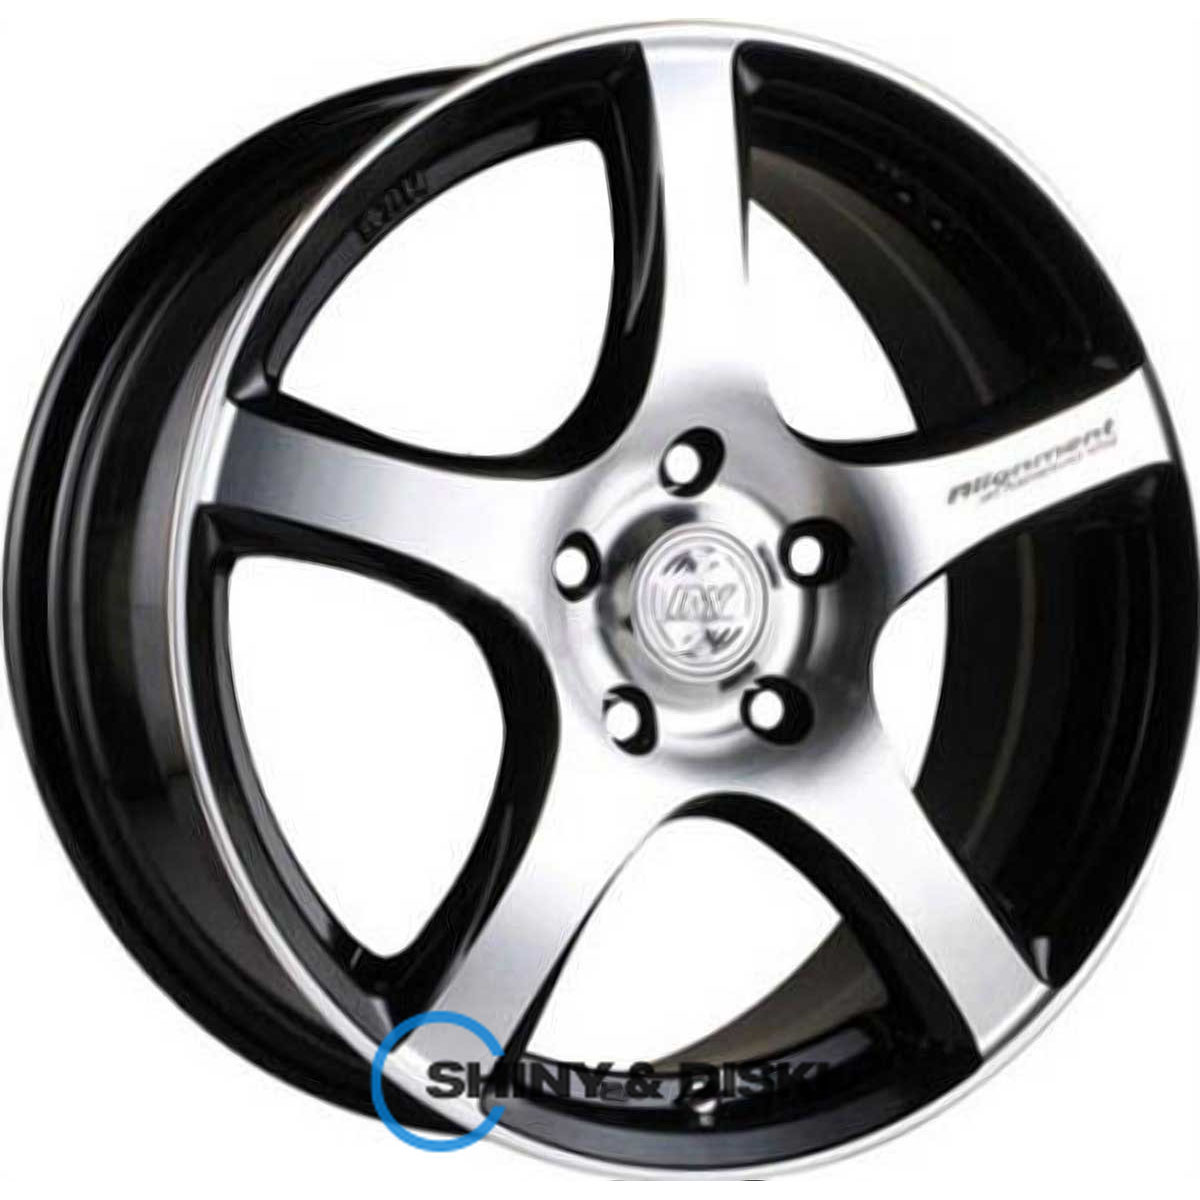 rs tuning h-531 bkfp r16 w7 pcd5x114.3 et35 dia67.1